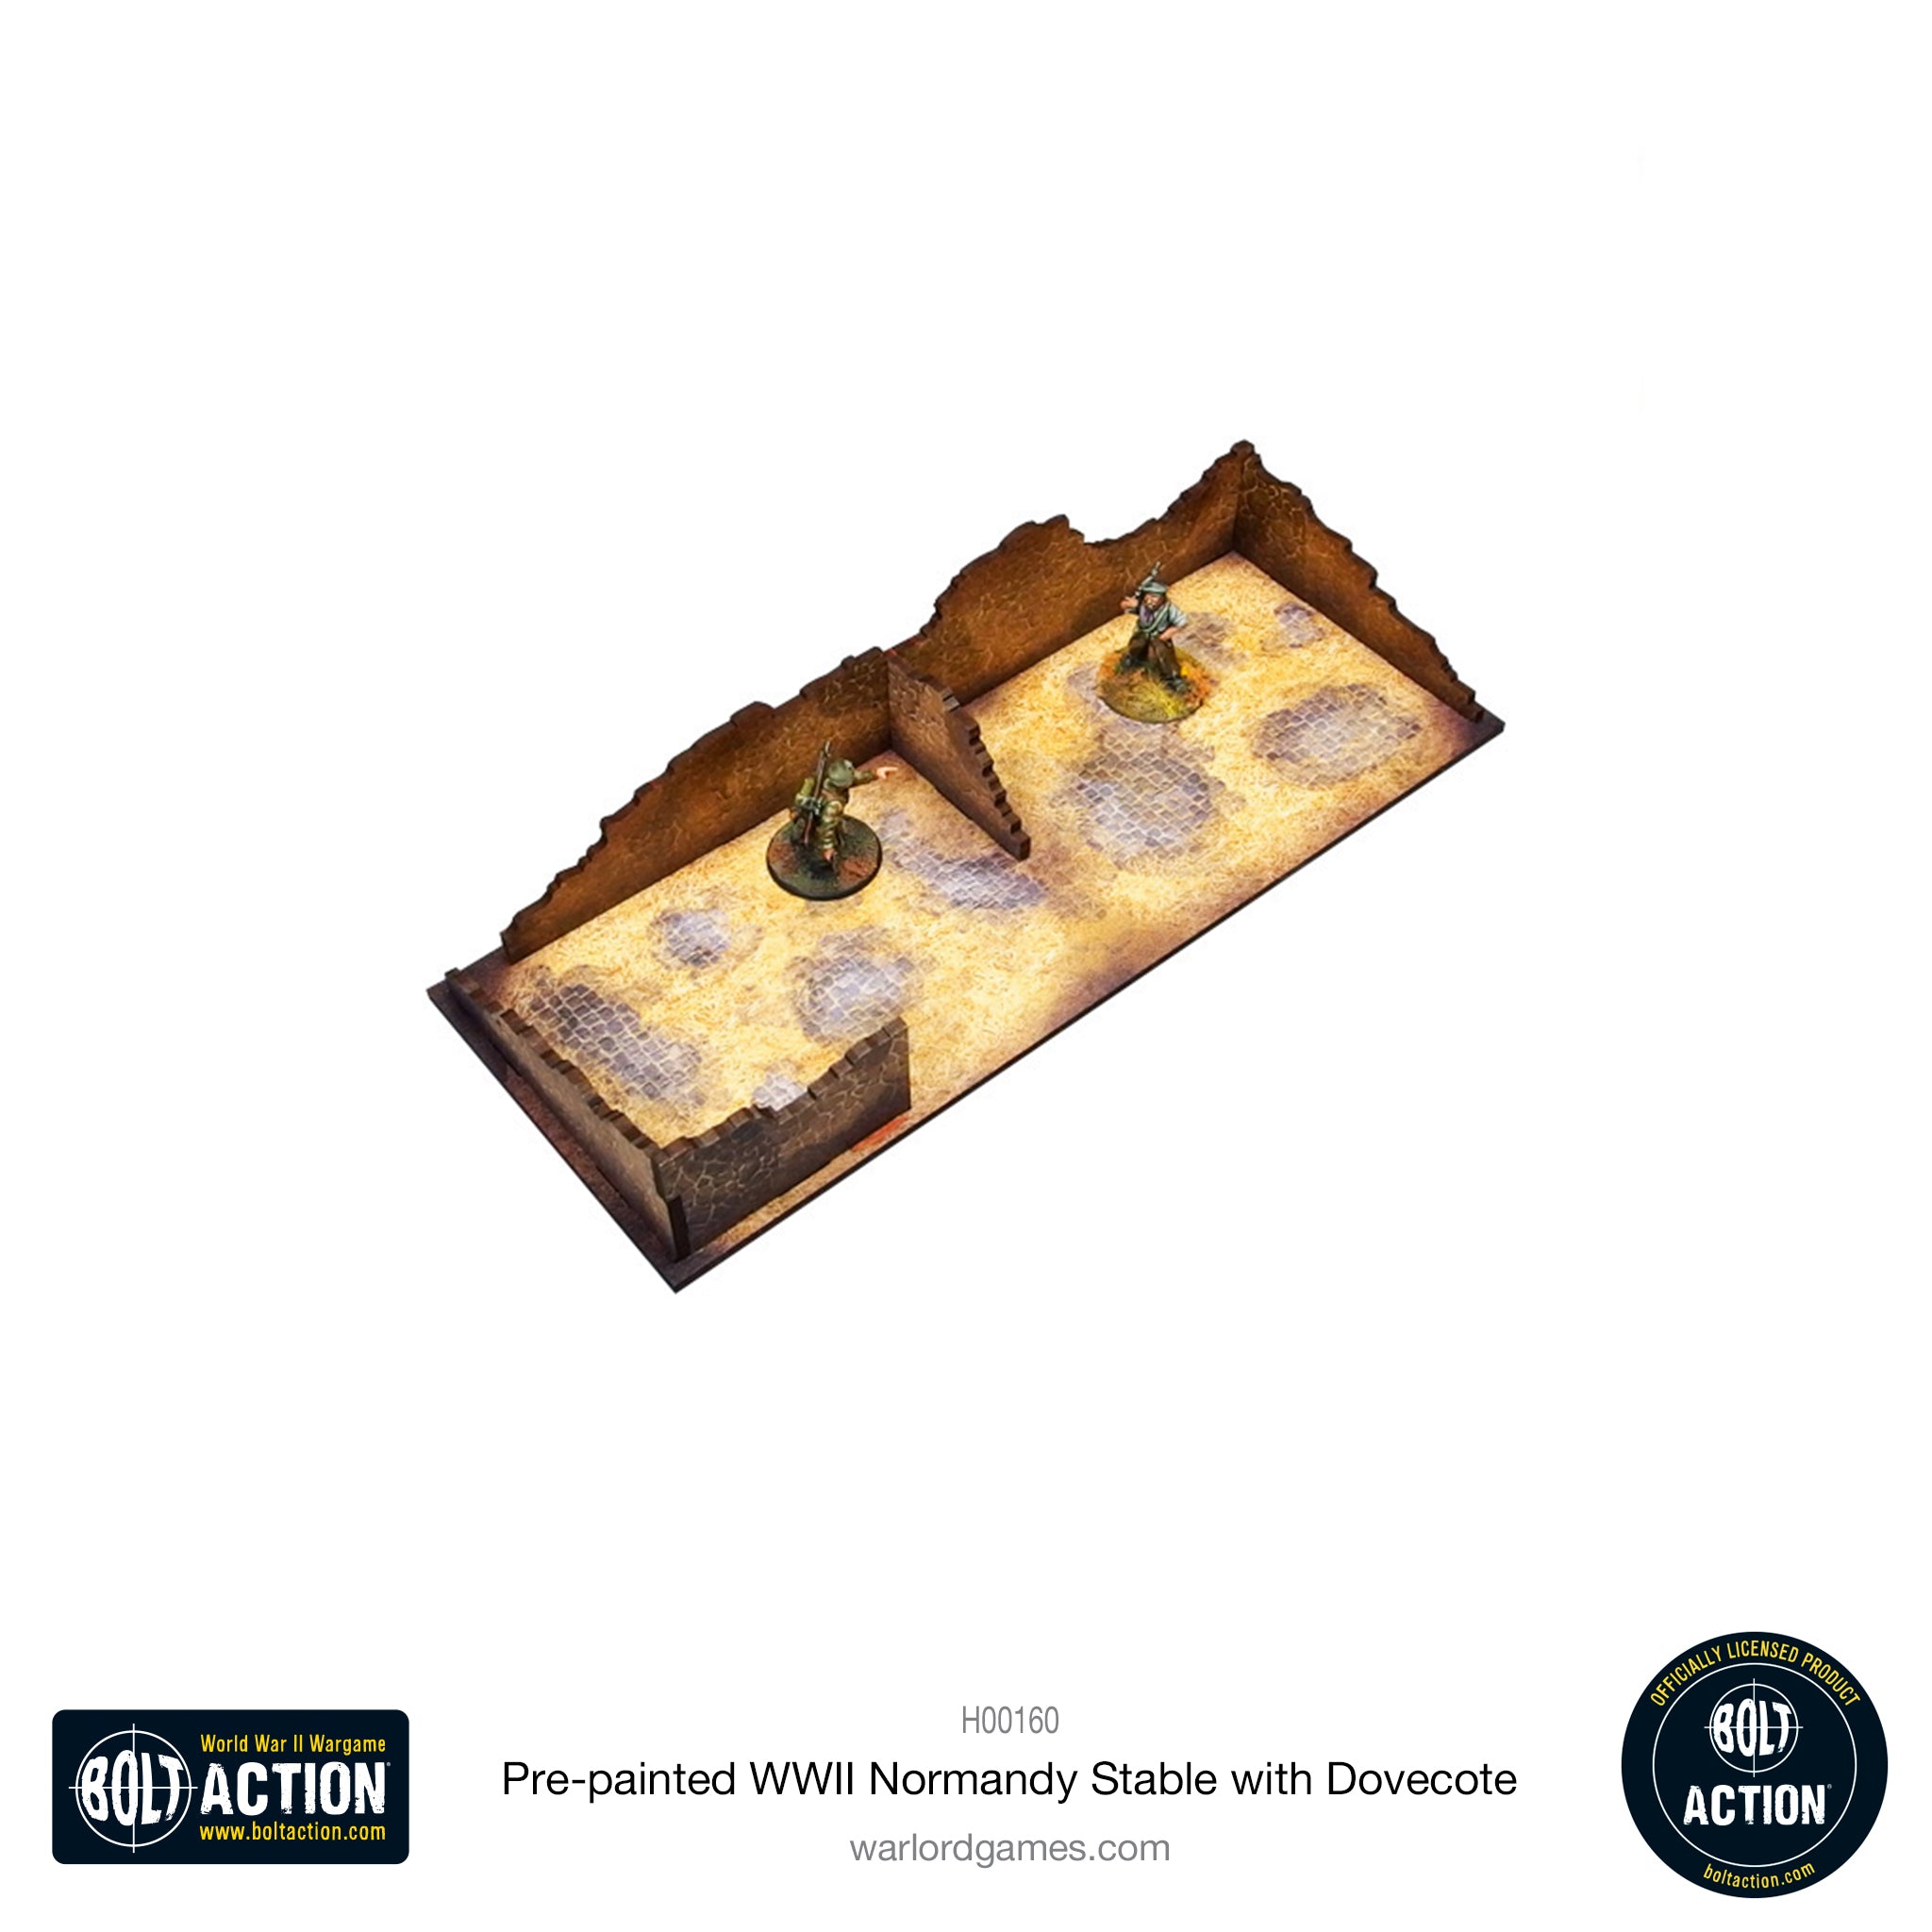 Bolt Action: Pre-painted WWII Normandy Stable with Dovecote